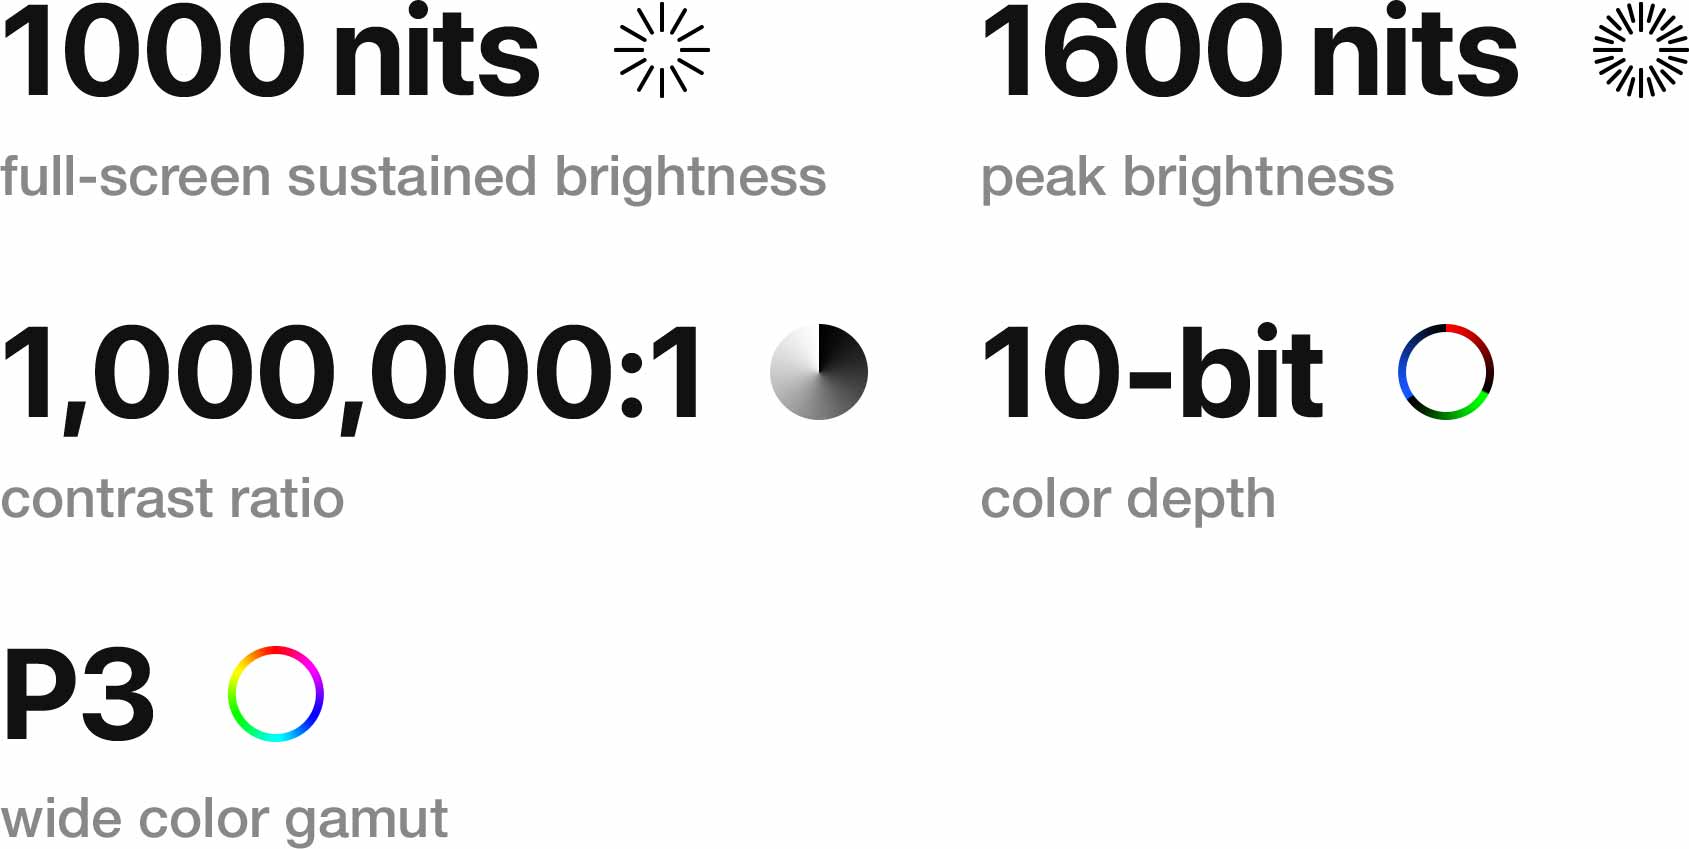 1000 nits full-screen sustained brightness, 1600 nits peak brightness, 1,000,000 to 1 contrast ratio, 10 bit color depth, P3 wide color gamut